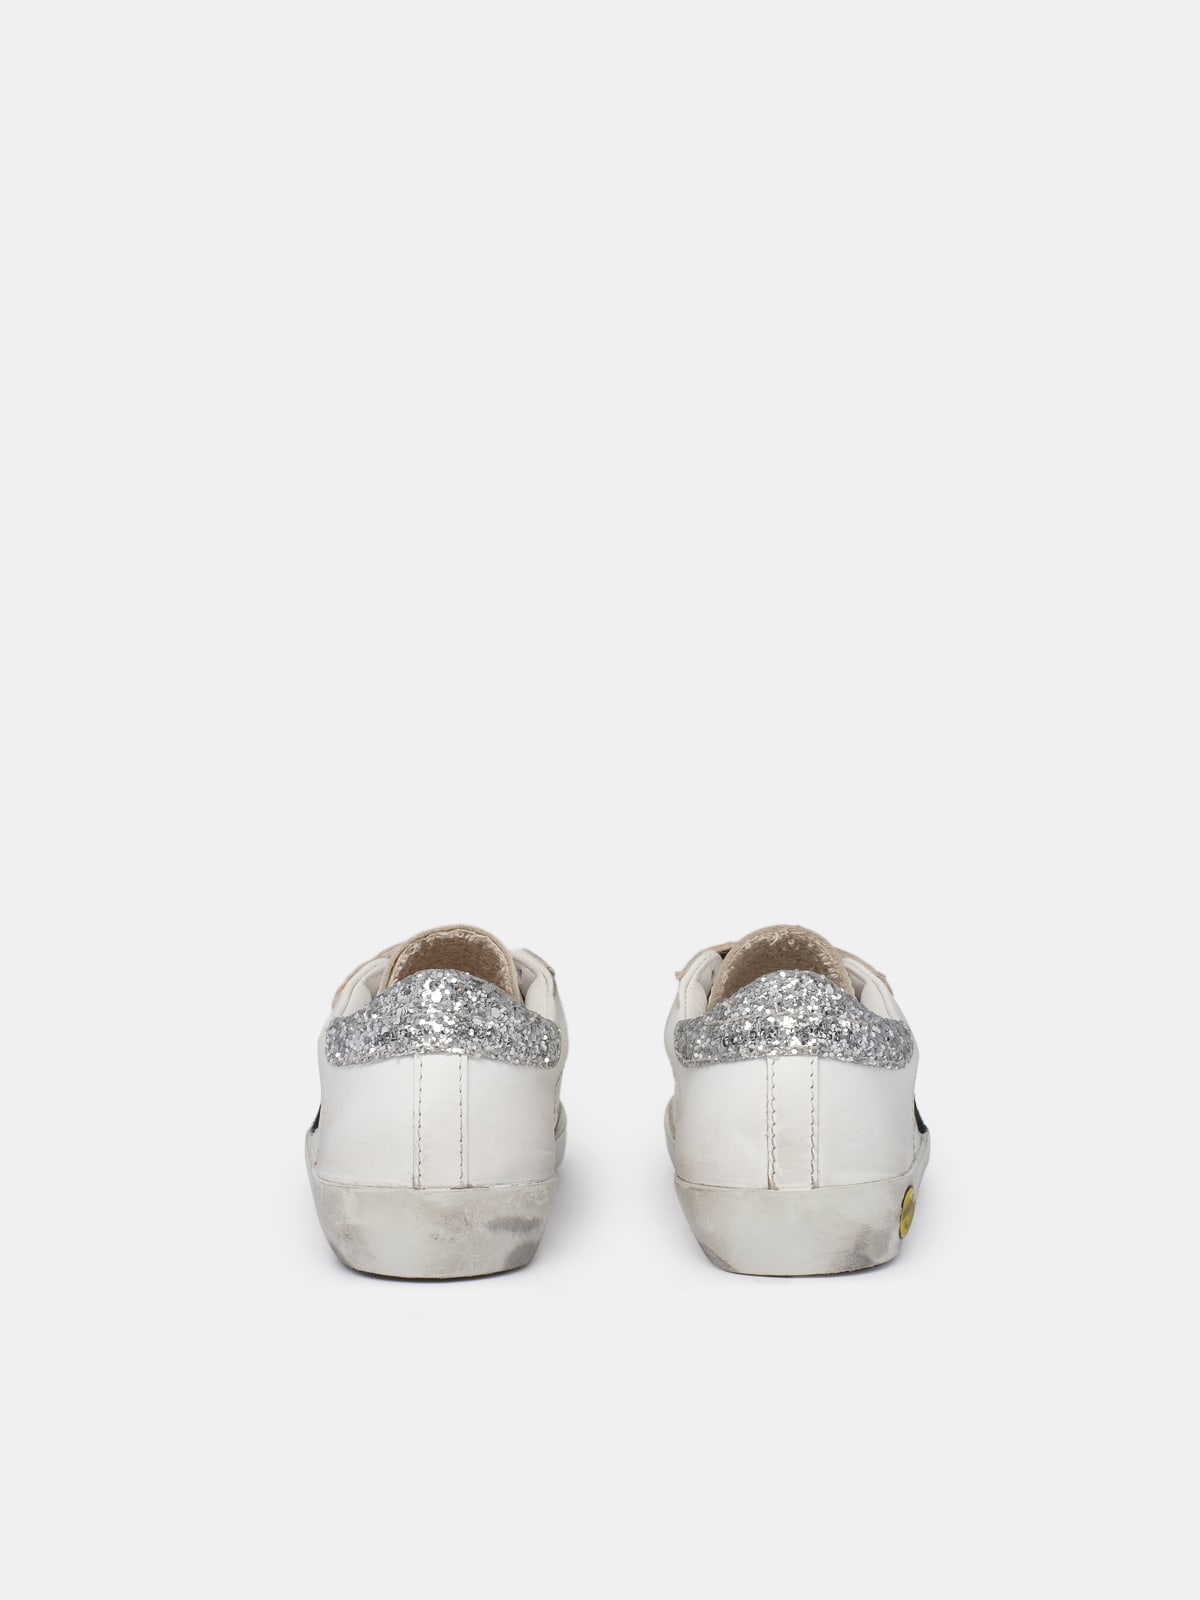 Golden Goose - Old School sneakers with leopard-print detail and sparkling heel tab in 